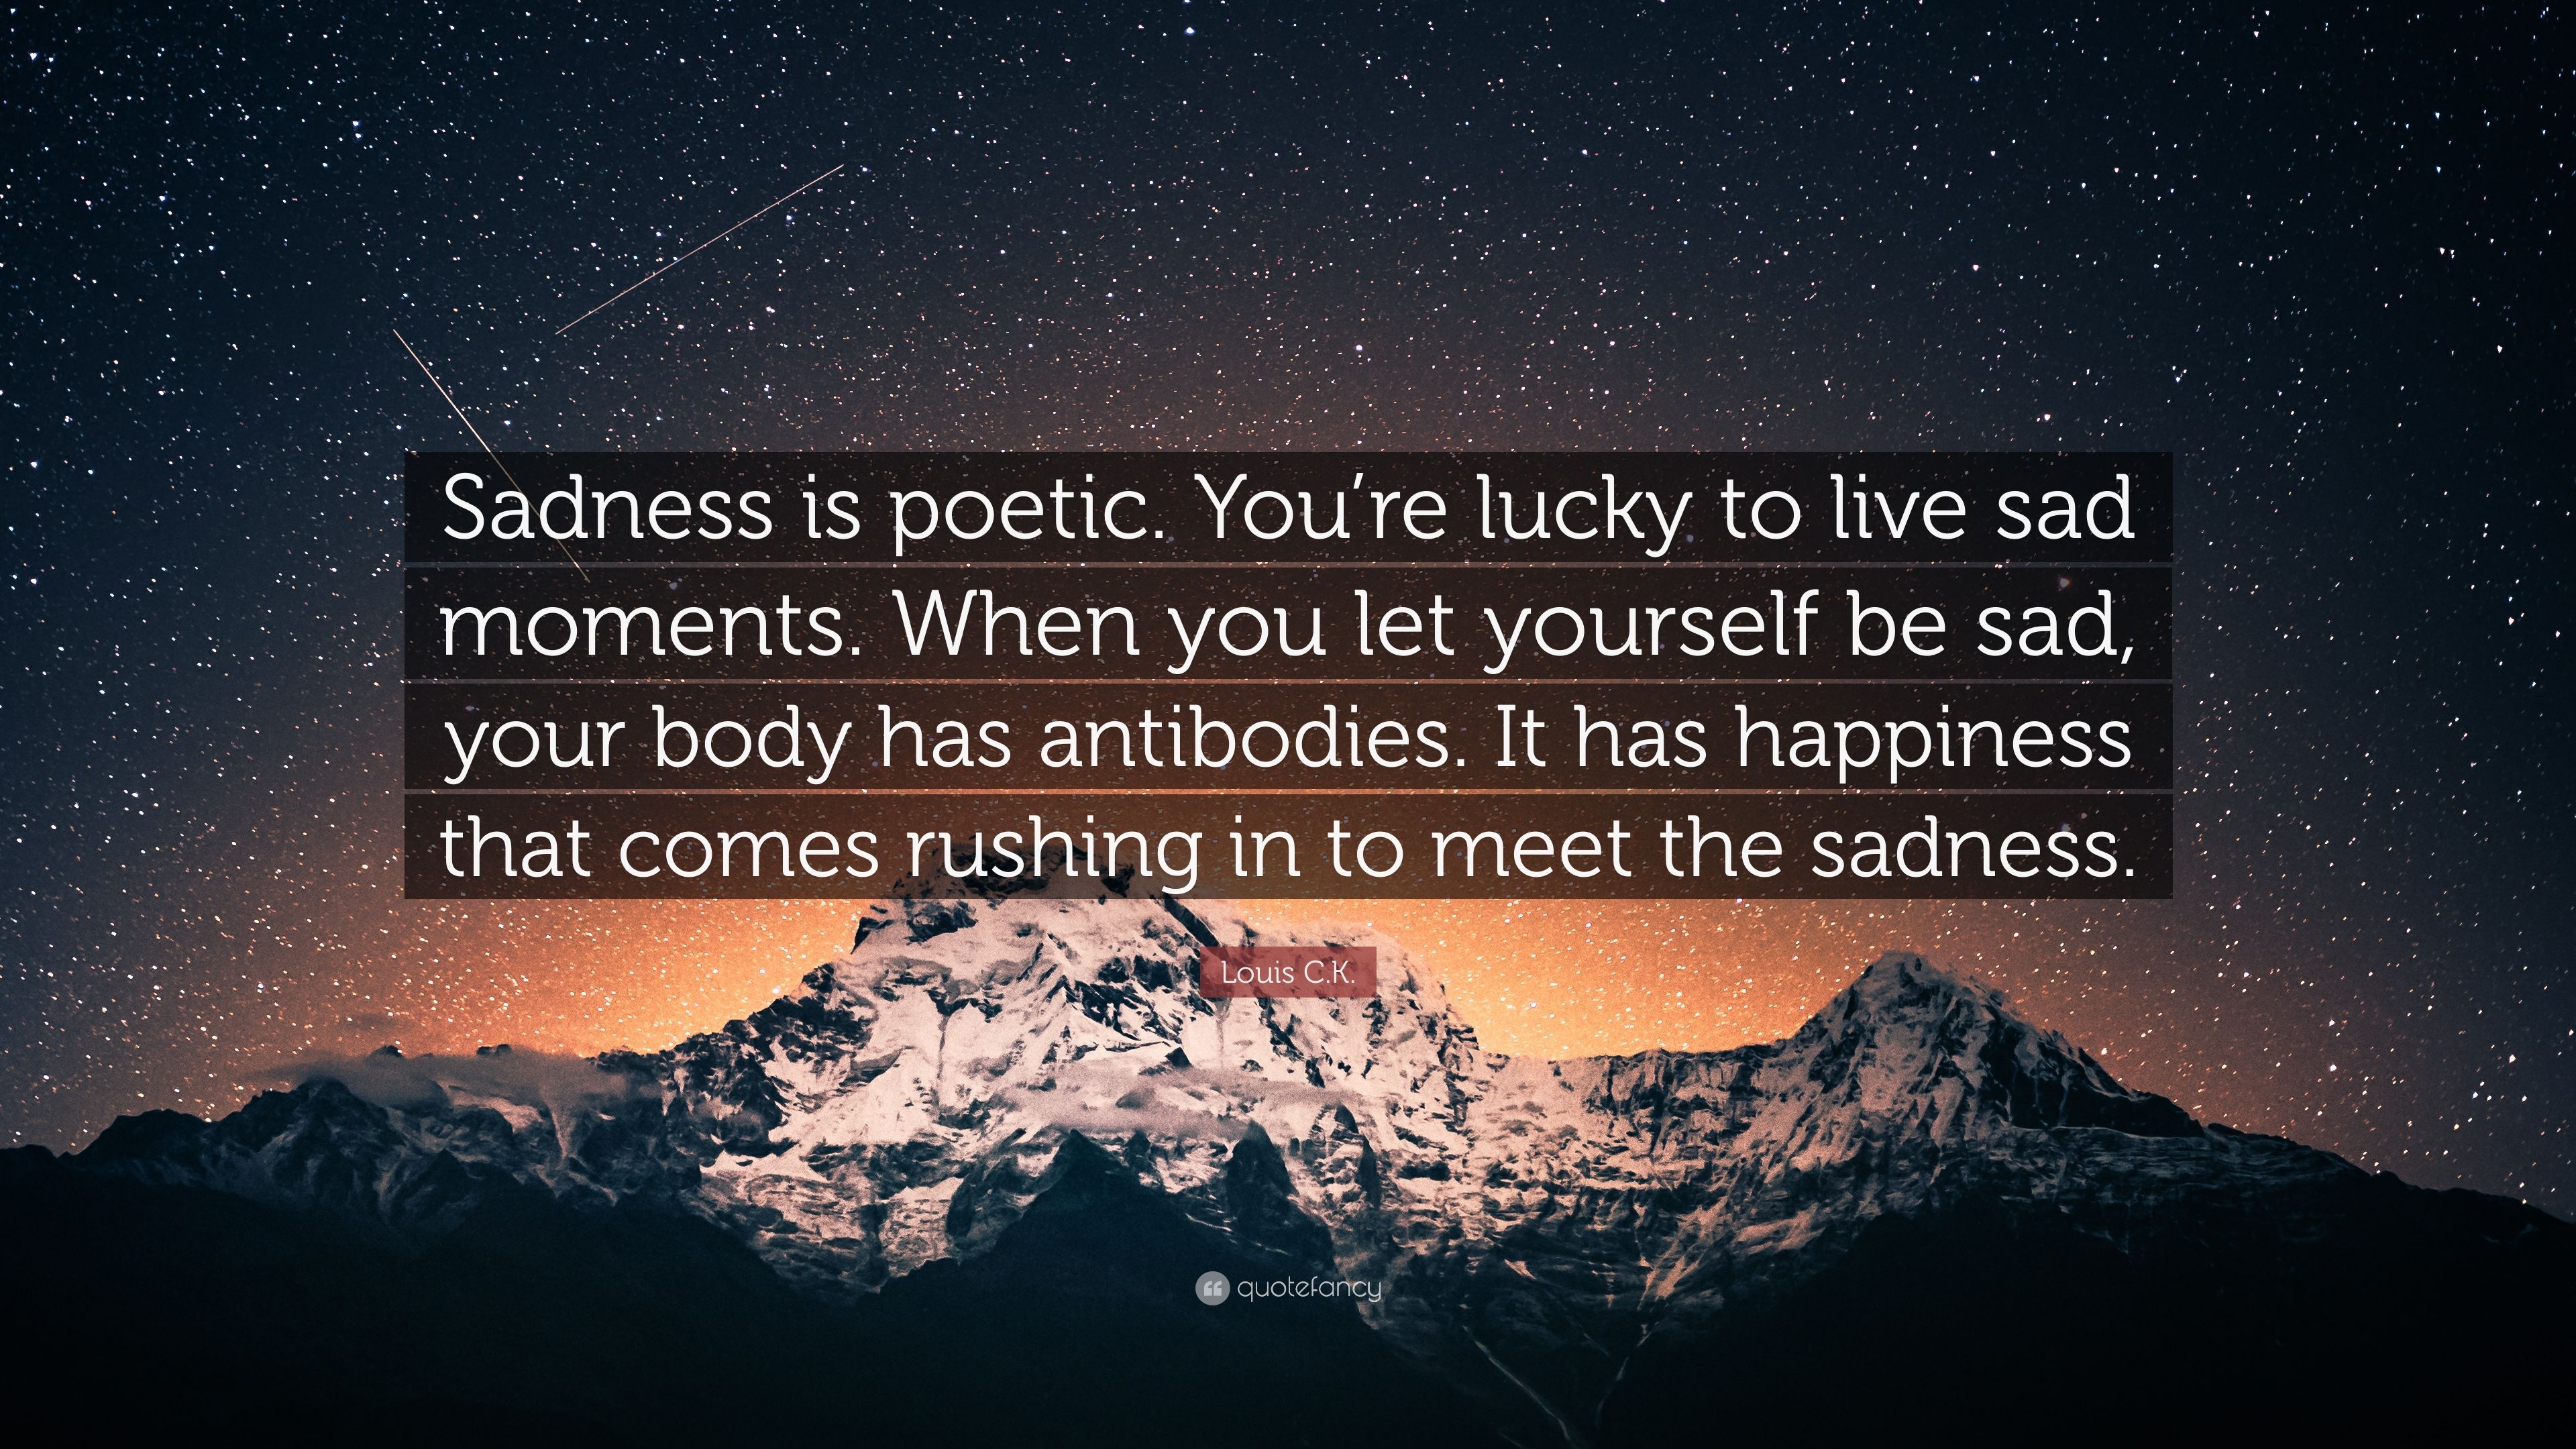 Louis C.K. Quote: “Sadness is poetic. You're lucky to live sad moments. When you let yourself be sad, your body has antibodies. It has happ.” (12 wallpaper)